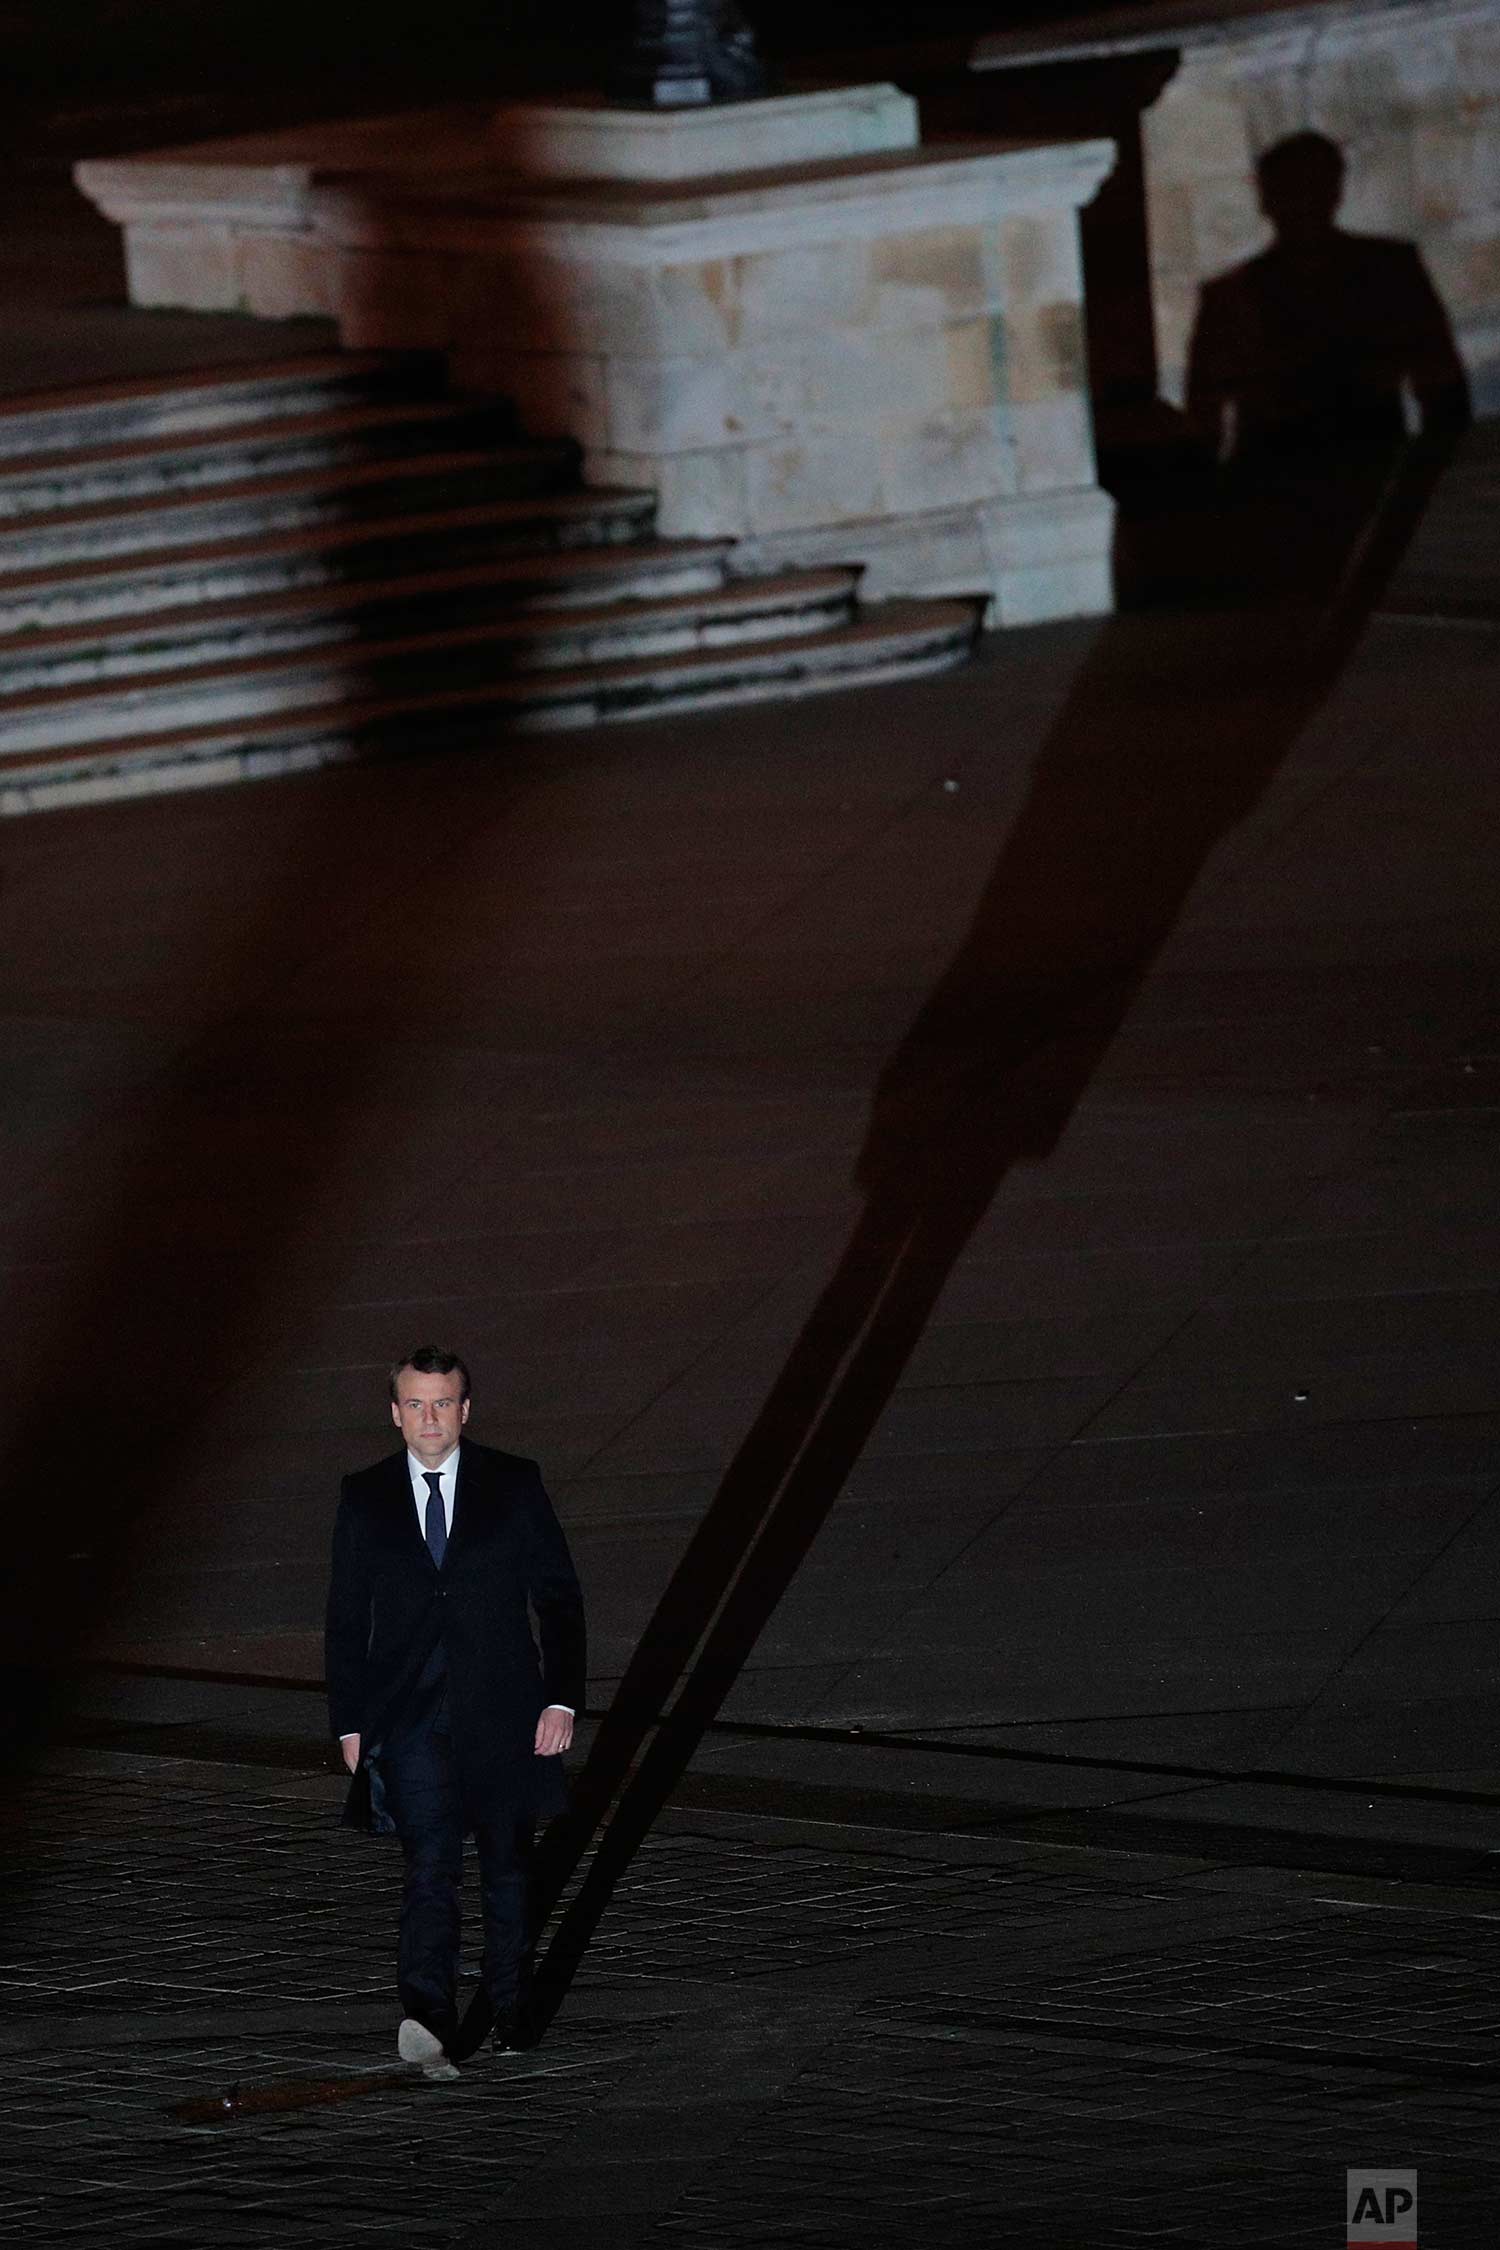  In this Sunday May 7, 2017 photo, incoming French President Emmanuel Macron walks towards the stage to address his supporters at the Louvre Palace in Paris. Polling agencies have projected that centrist Macron will be France's next president, puttin